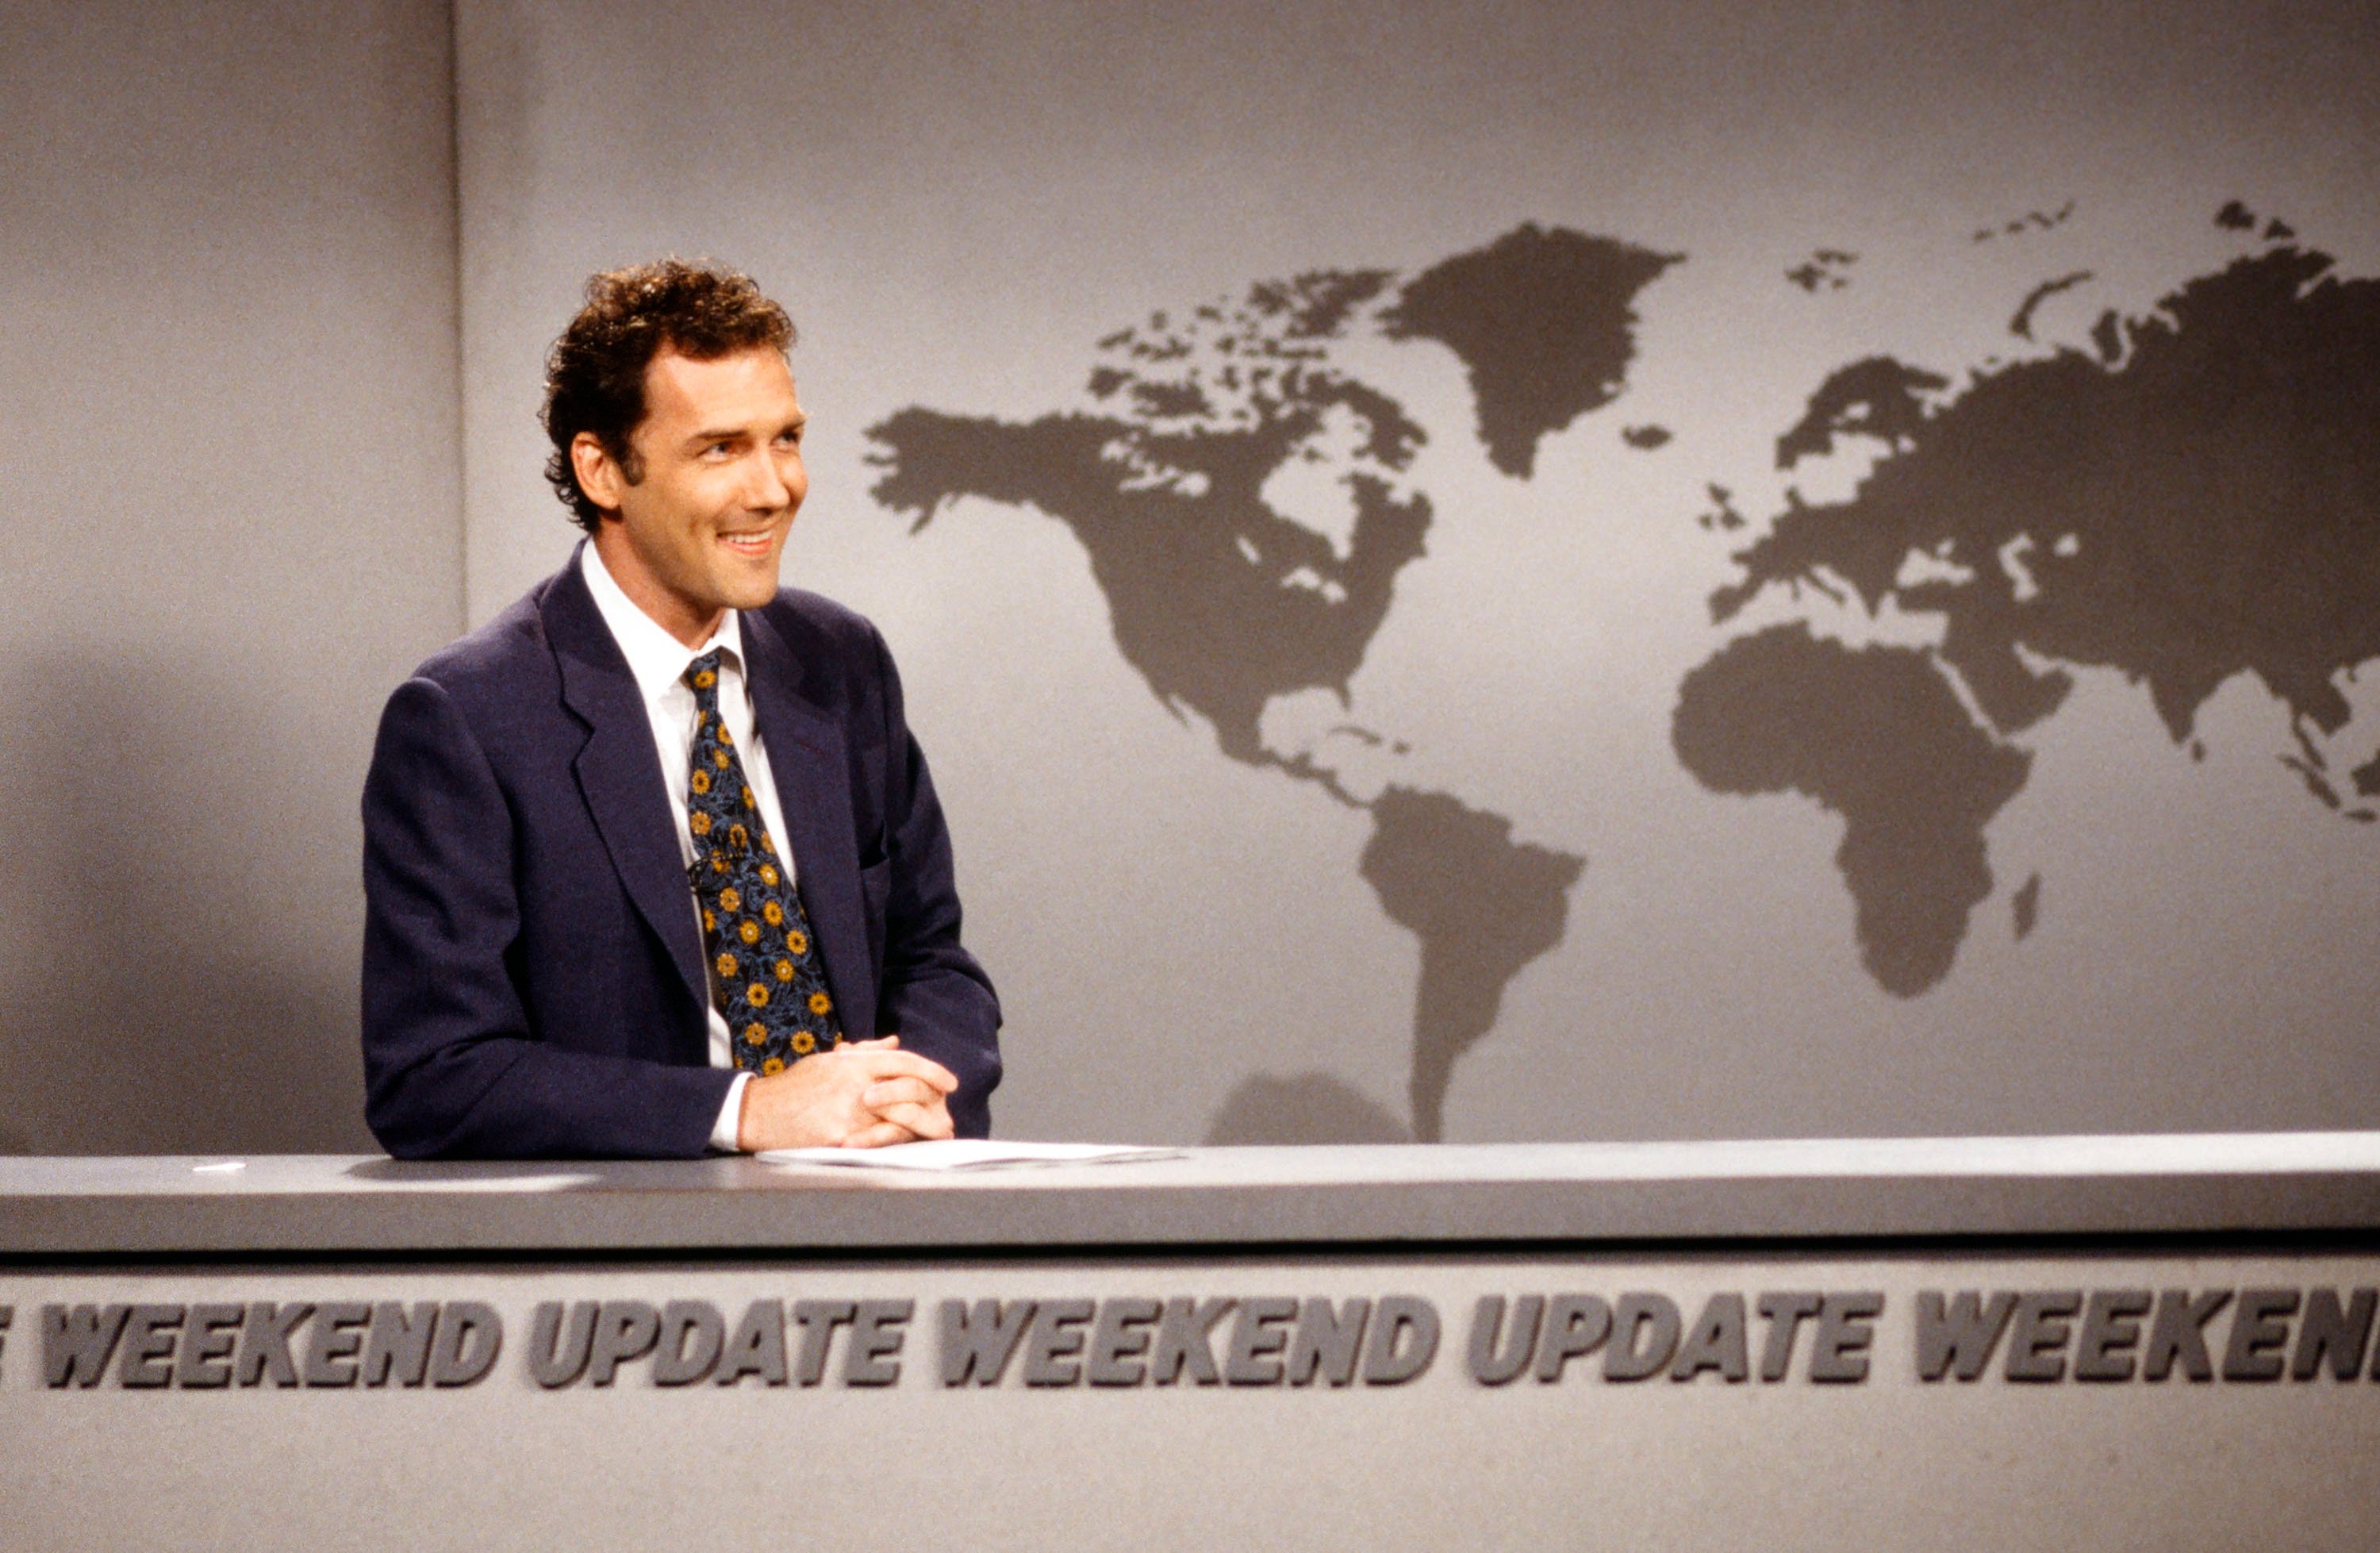 Norm MacDonald during the 'Weekend Update' skit on 'SNL'